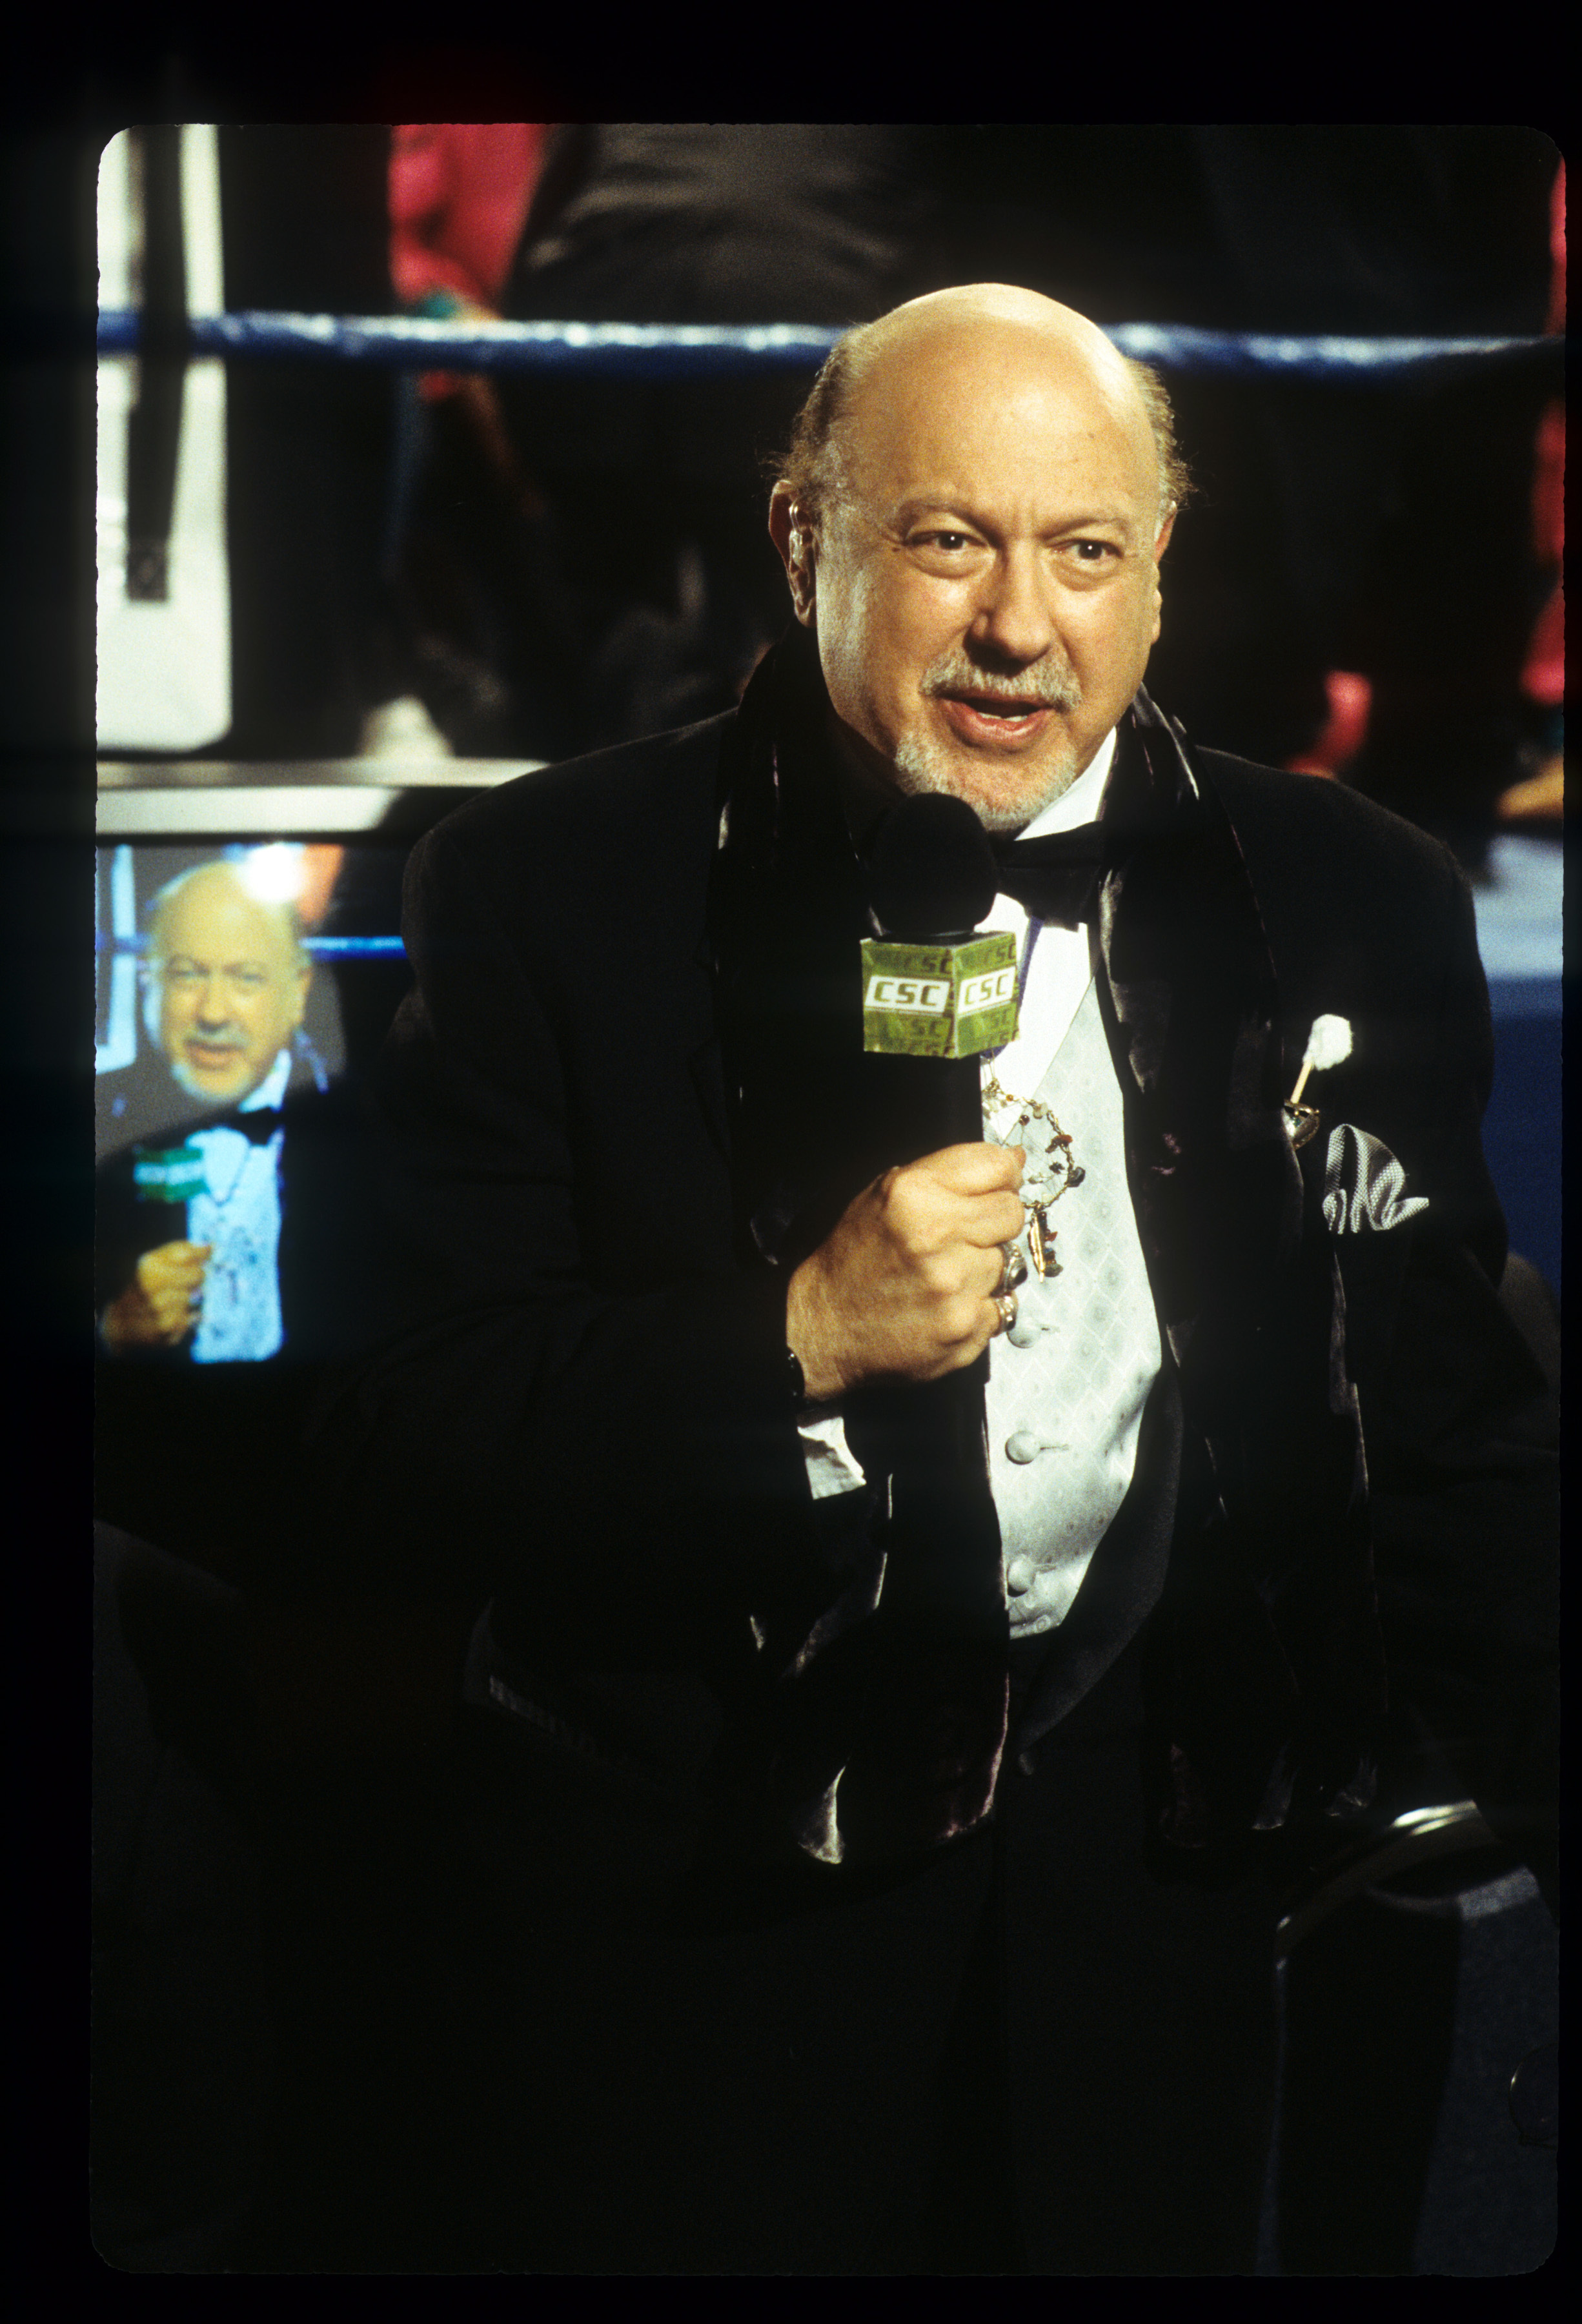 <p>Actor Allen Garfield, 80, died on April 7 from COVID-19. His impressive roster of credits include appearances in films like "Irreconcilable Differences," "Beverly Hills Cop II" and "Diabolique." He is pictured here on an episode of the series "Sports Night" in 2000.</p>